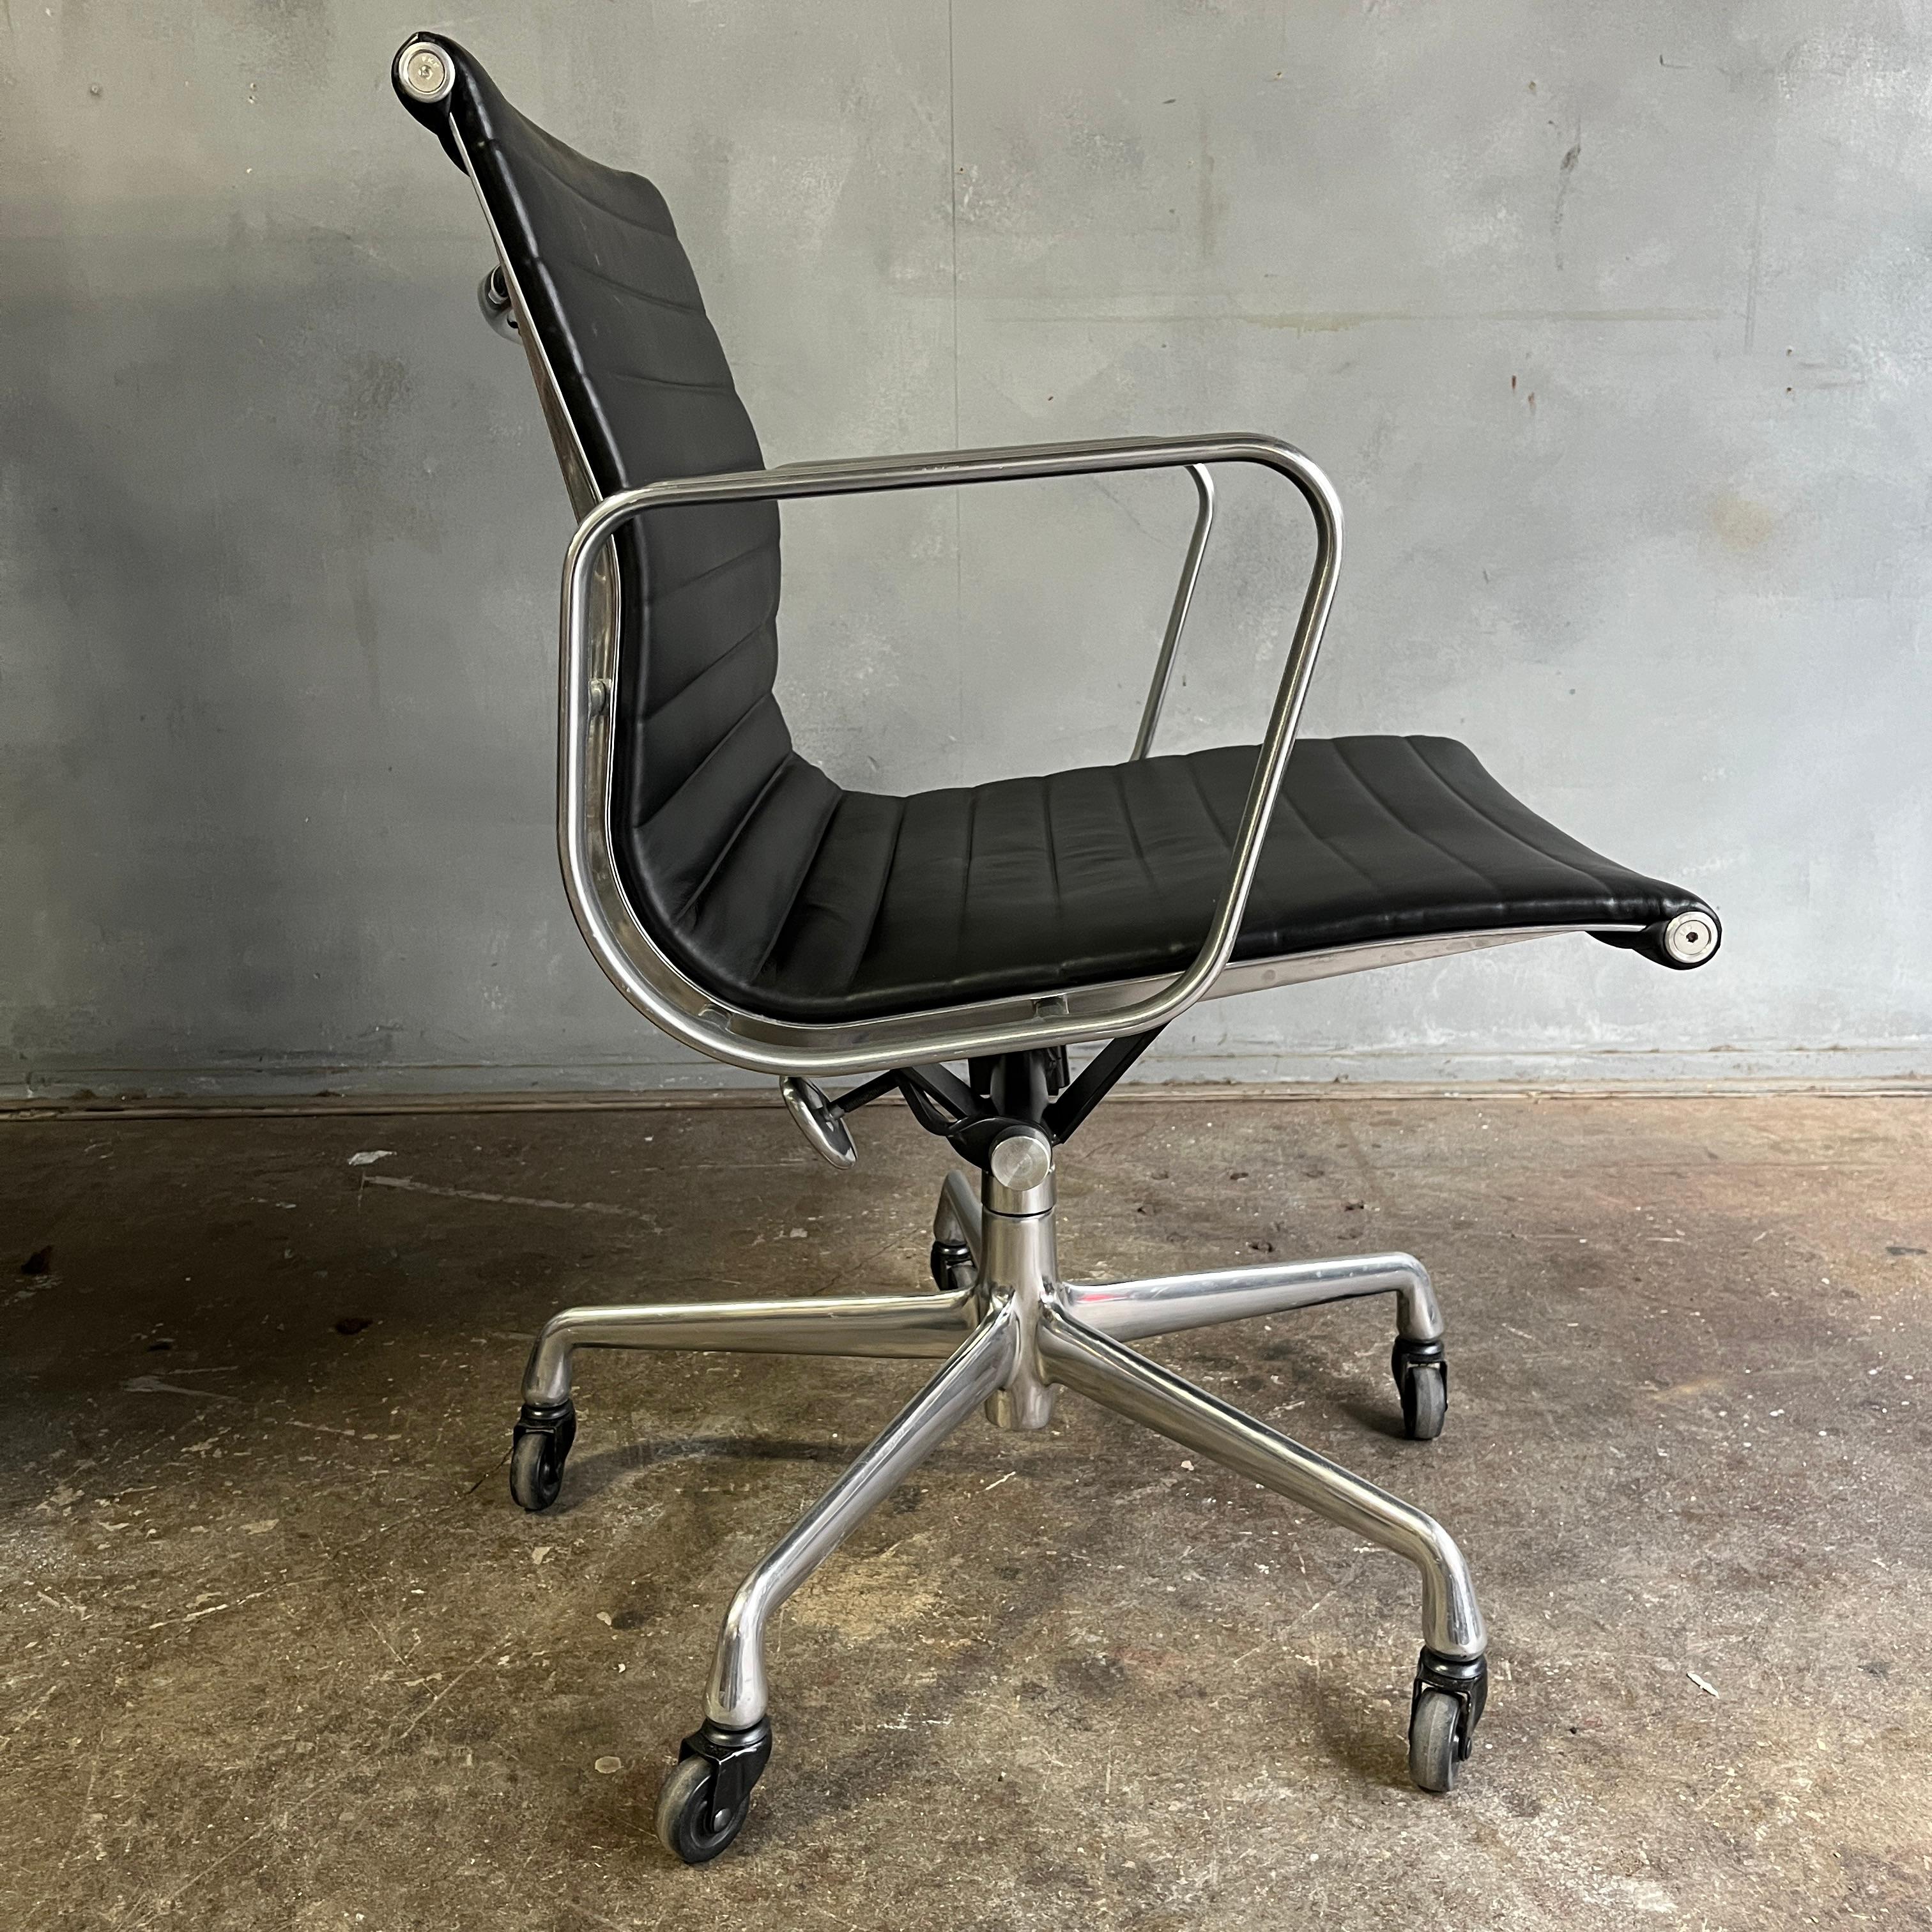 For your consideration up to 18 aluminum group chairs in black leather designed by Eames for Herman Miller. All in very good original condition showing minimal wear. With manual tilt and height adjustment. 

Arm Height 24.5 - 27.5''  
Height (in):